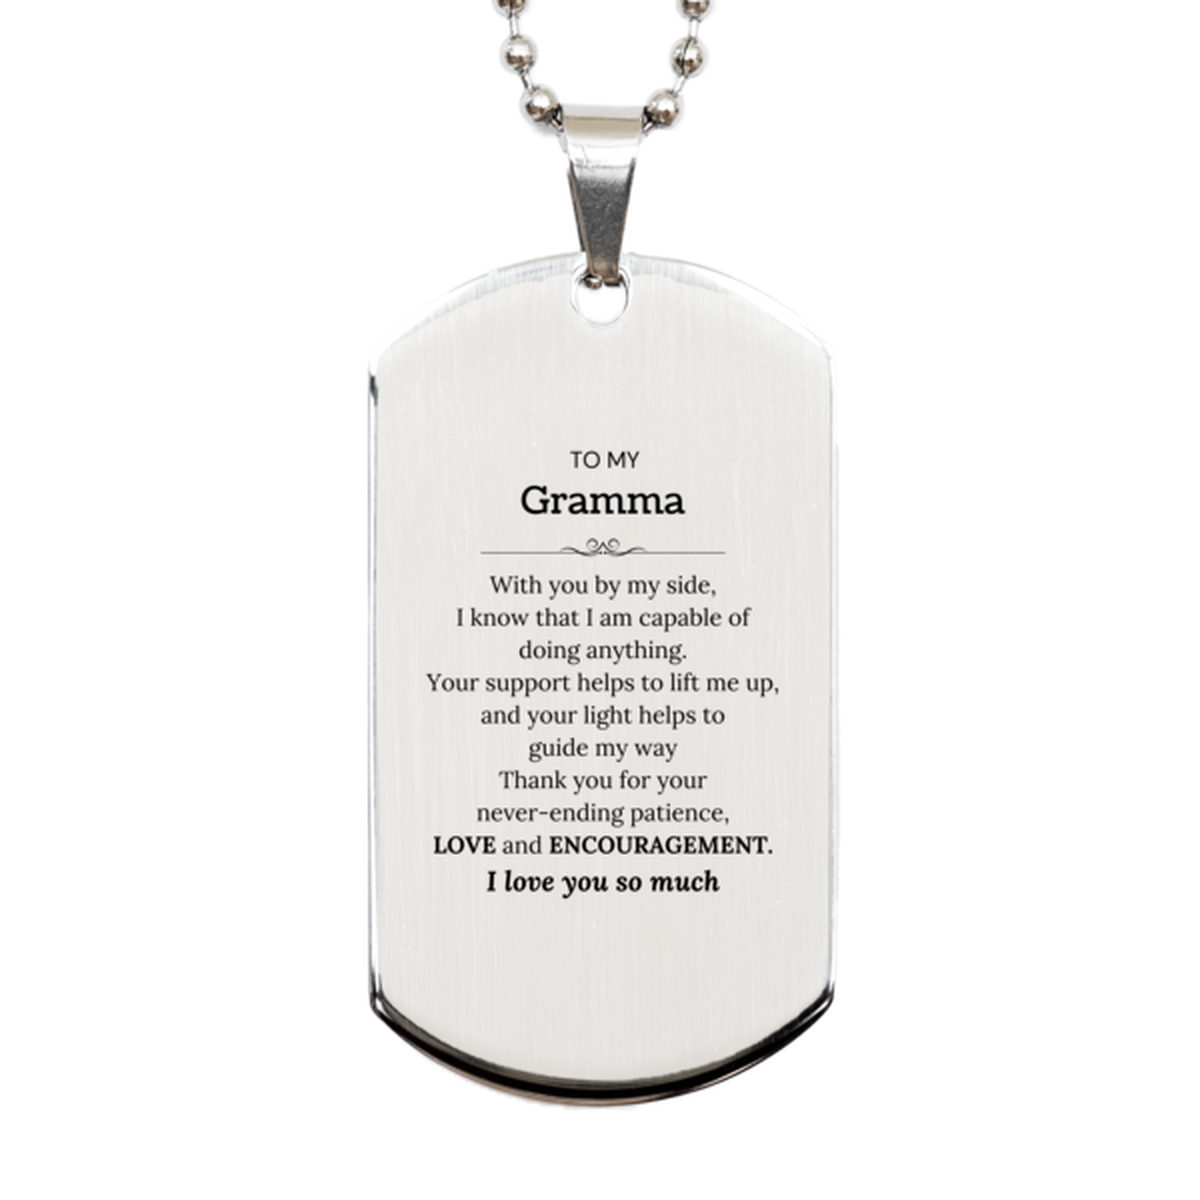 Appreciation Gramma Silver Dog Tag Gifts, To My Gramma Birthday Christmas Wedding Keepsake Gifts for Gramma With you by my side, I know that I am capable of doing anything. I love you so much